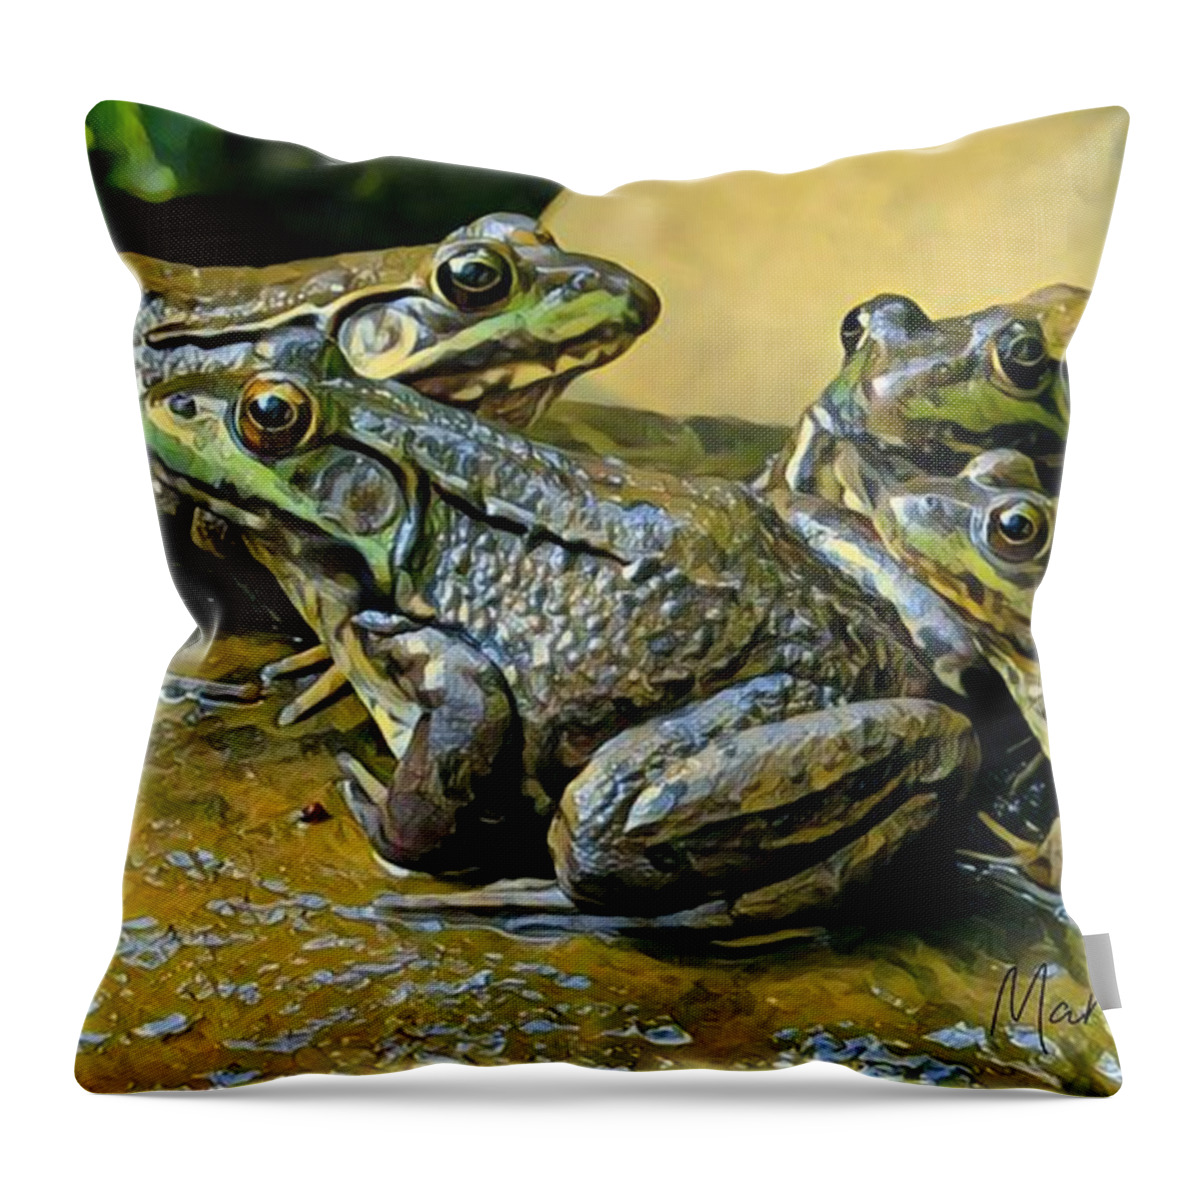 Frog Throw Pillow featuring the painting Frogs in a Huddle by Marilyn Smith